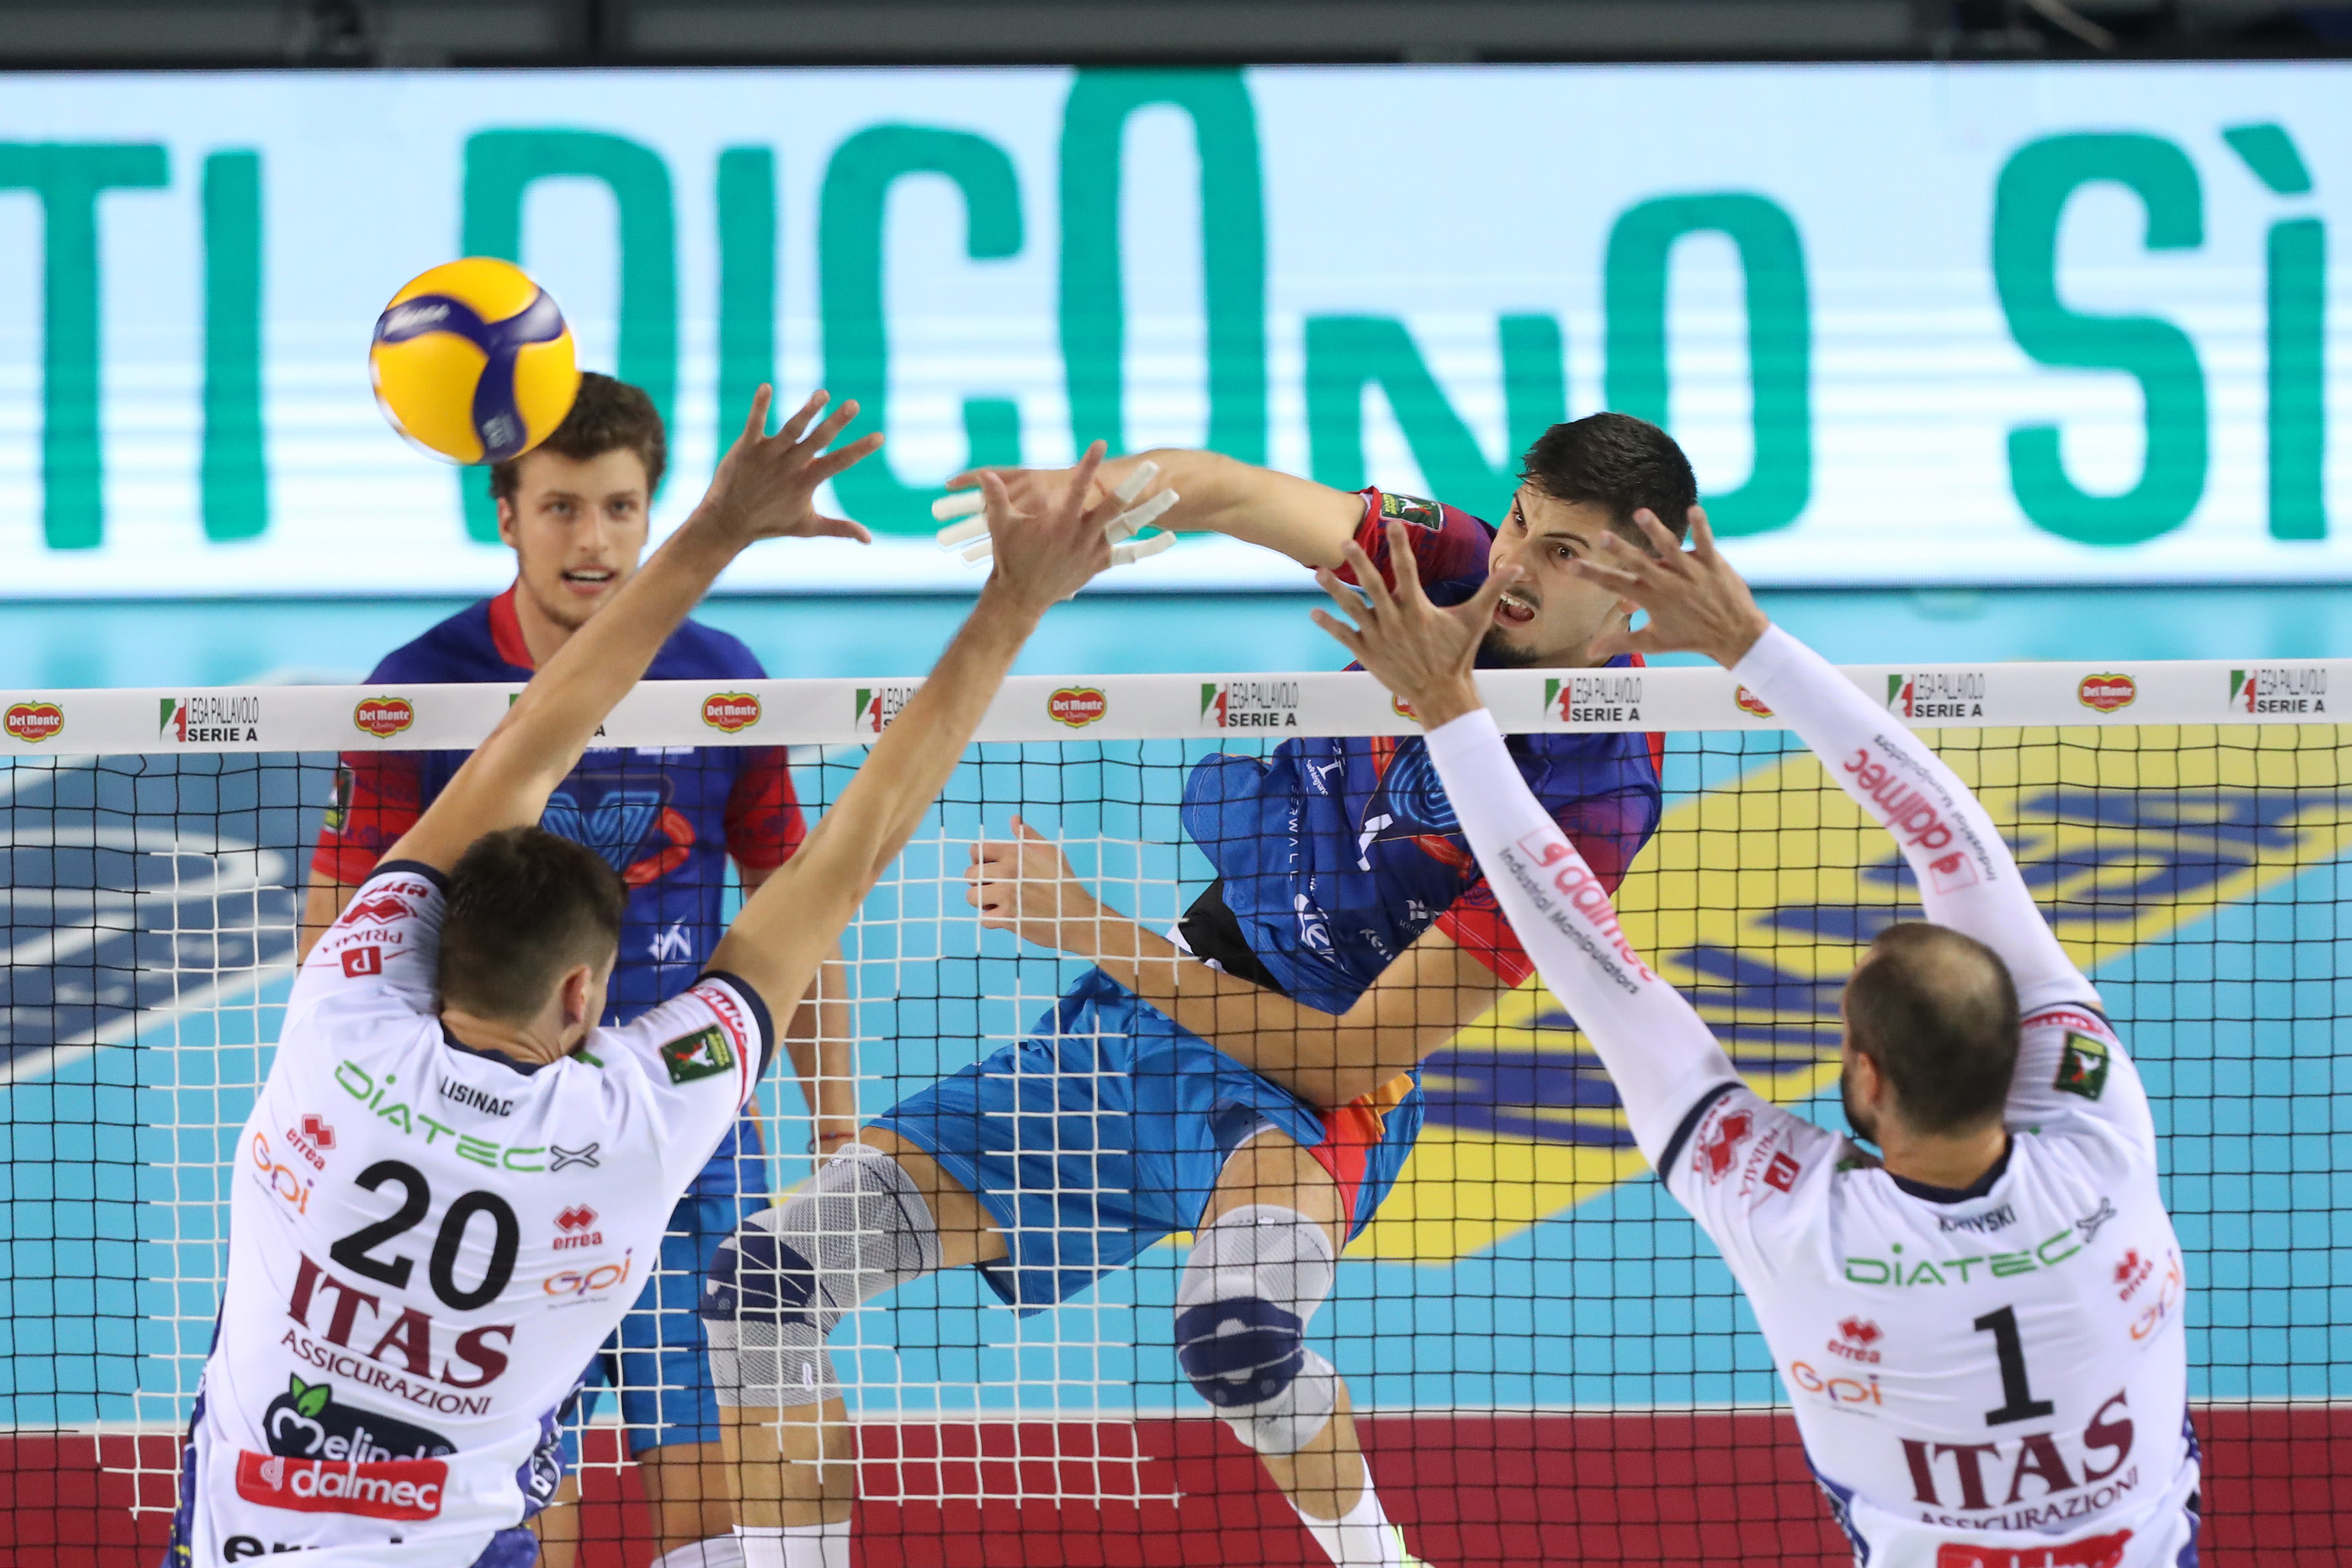 Itas Trentino to welcome Vero Volley Monza in remake of Supercoppa final volleyballworld